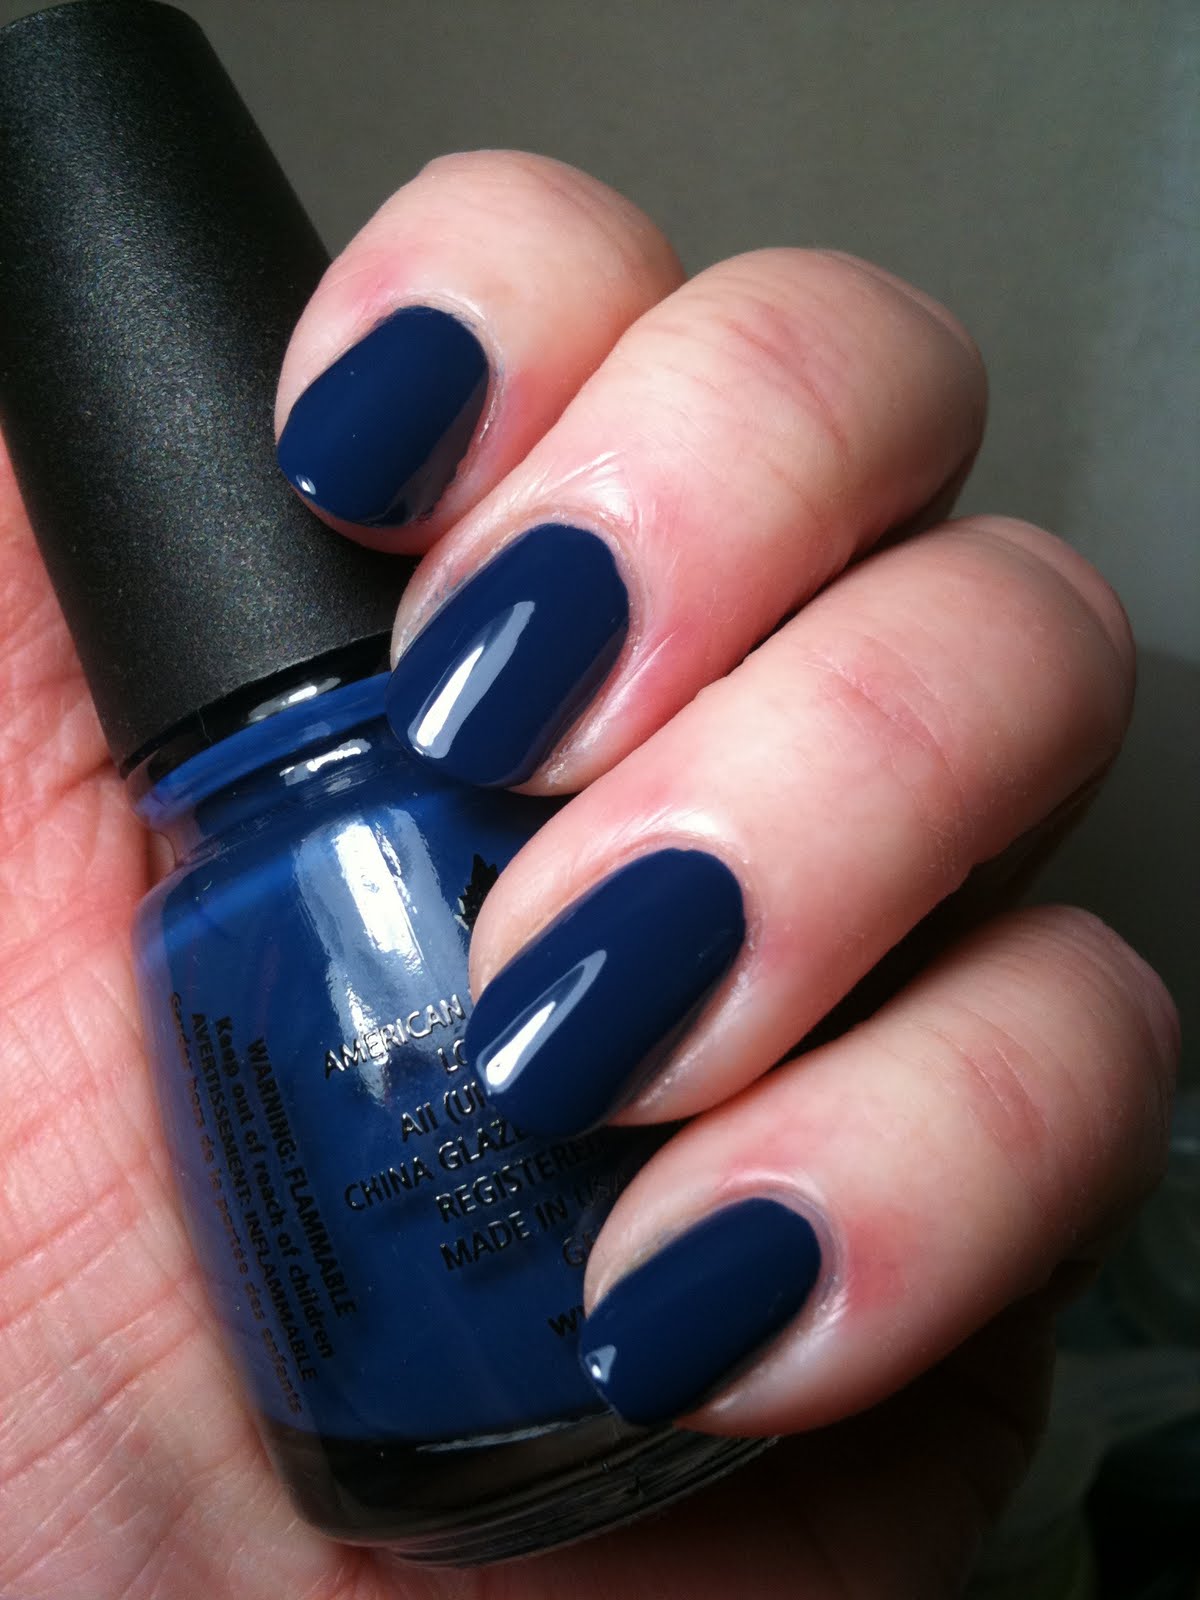 Canadian Nail Fanatic: Another from China Glaze Anchors Away....